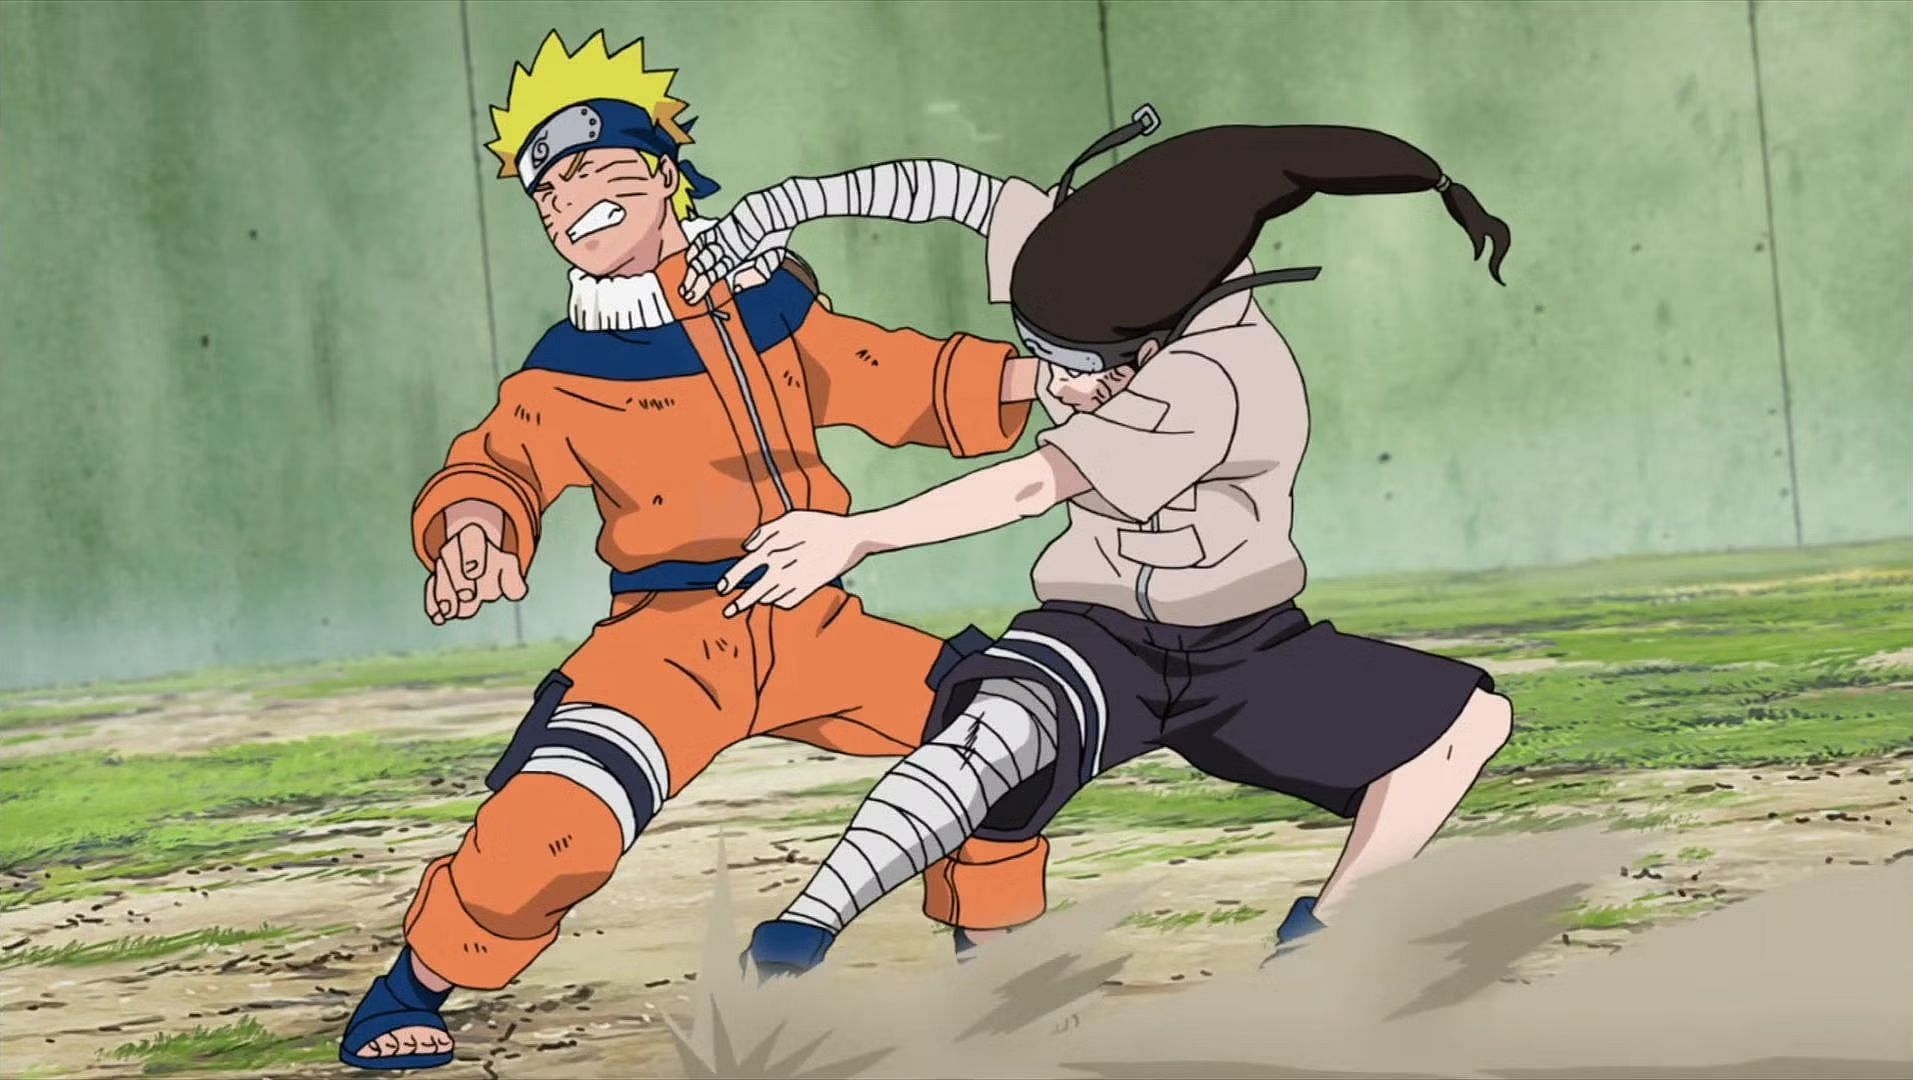 Naruto vs Neji is a classic yet one of the most overrated Naruto fights (image via Pierrot)